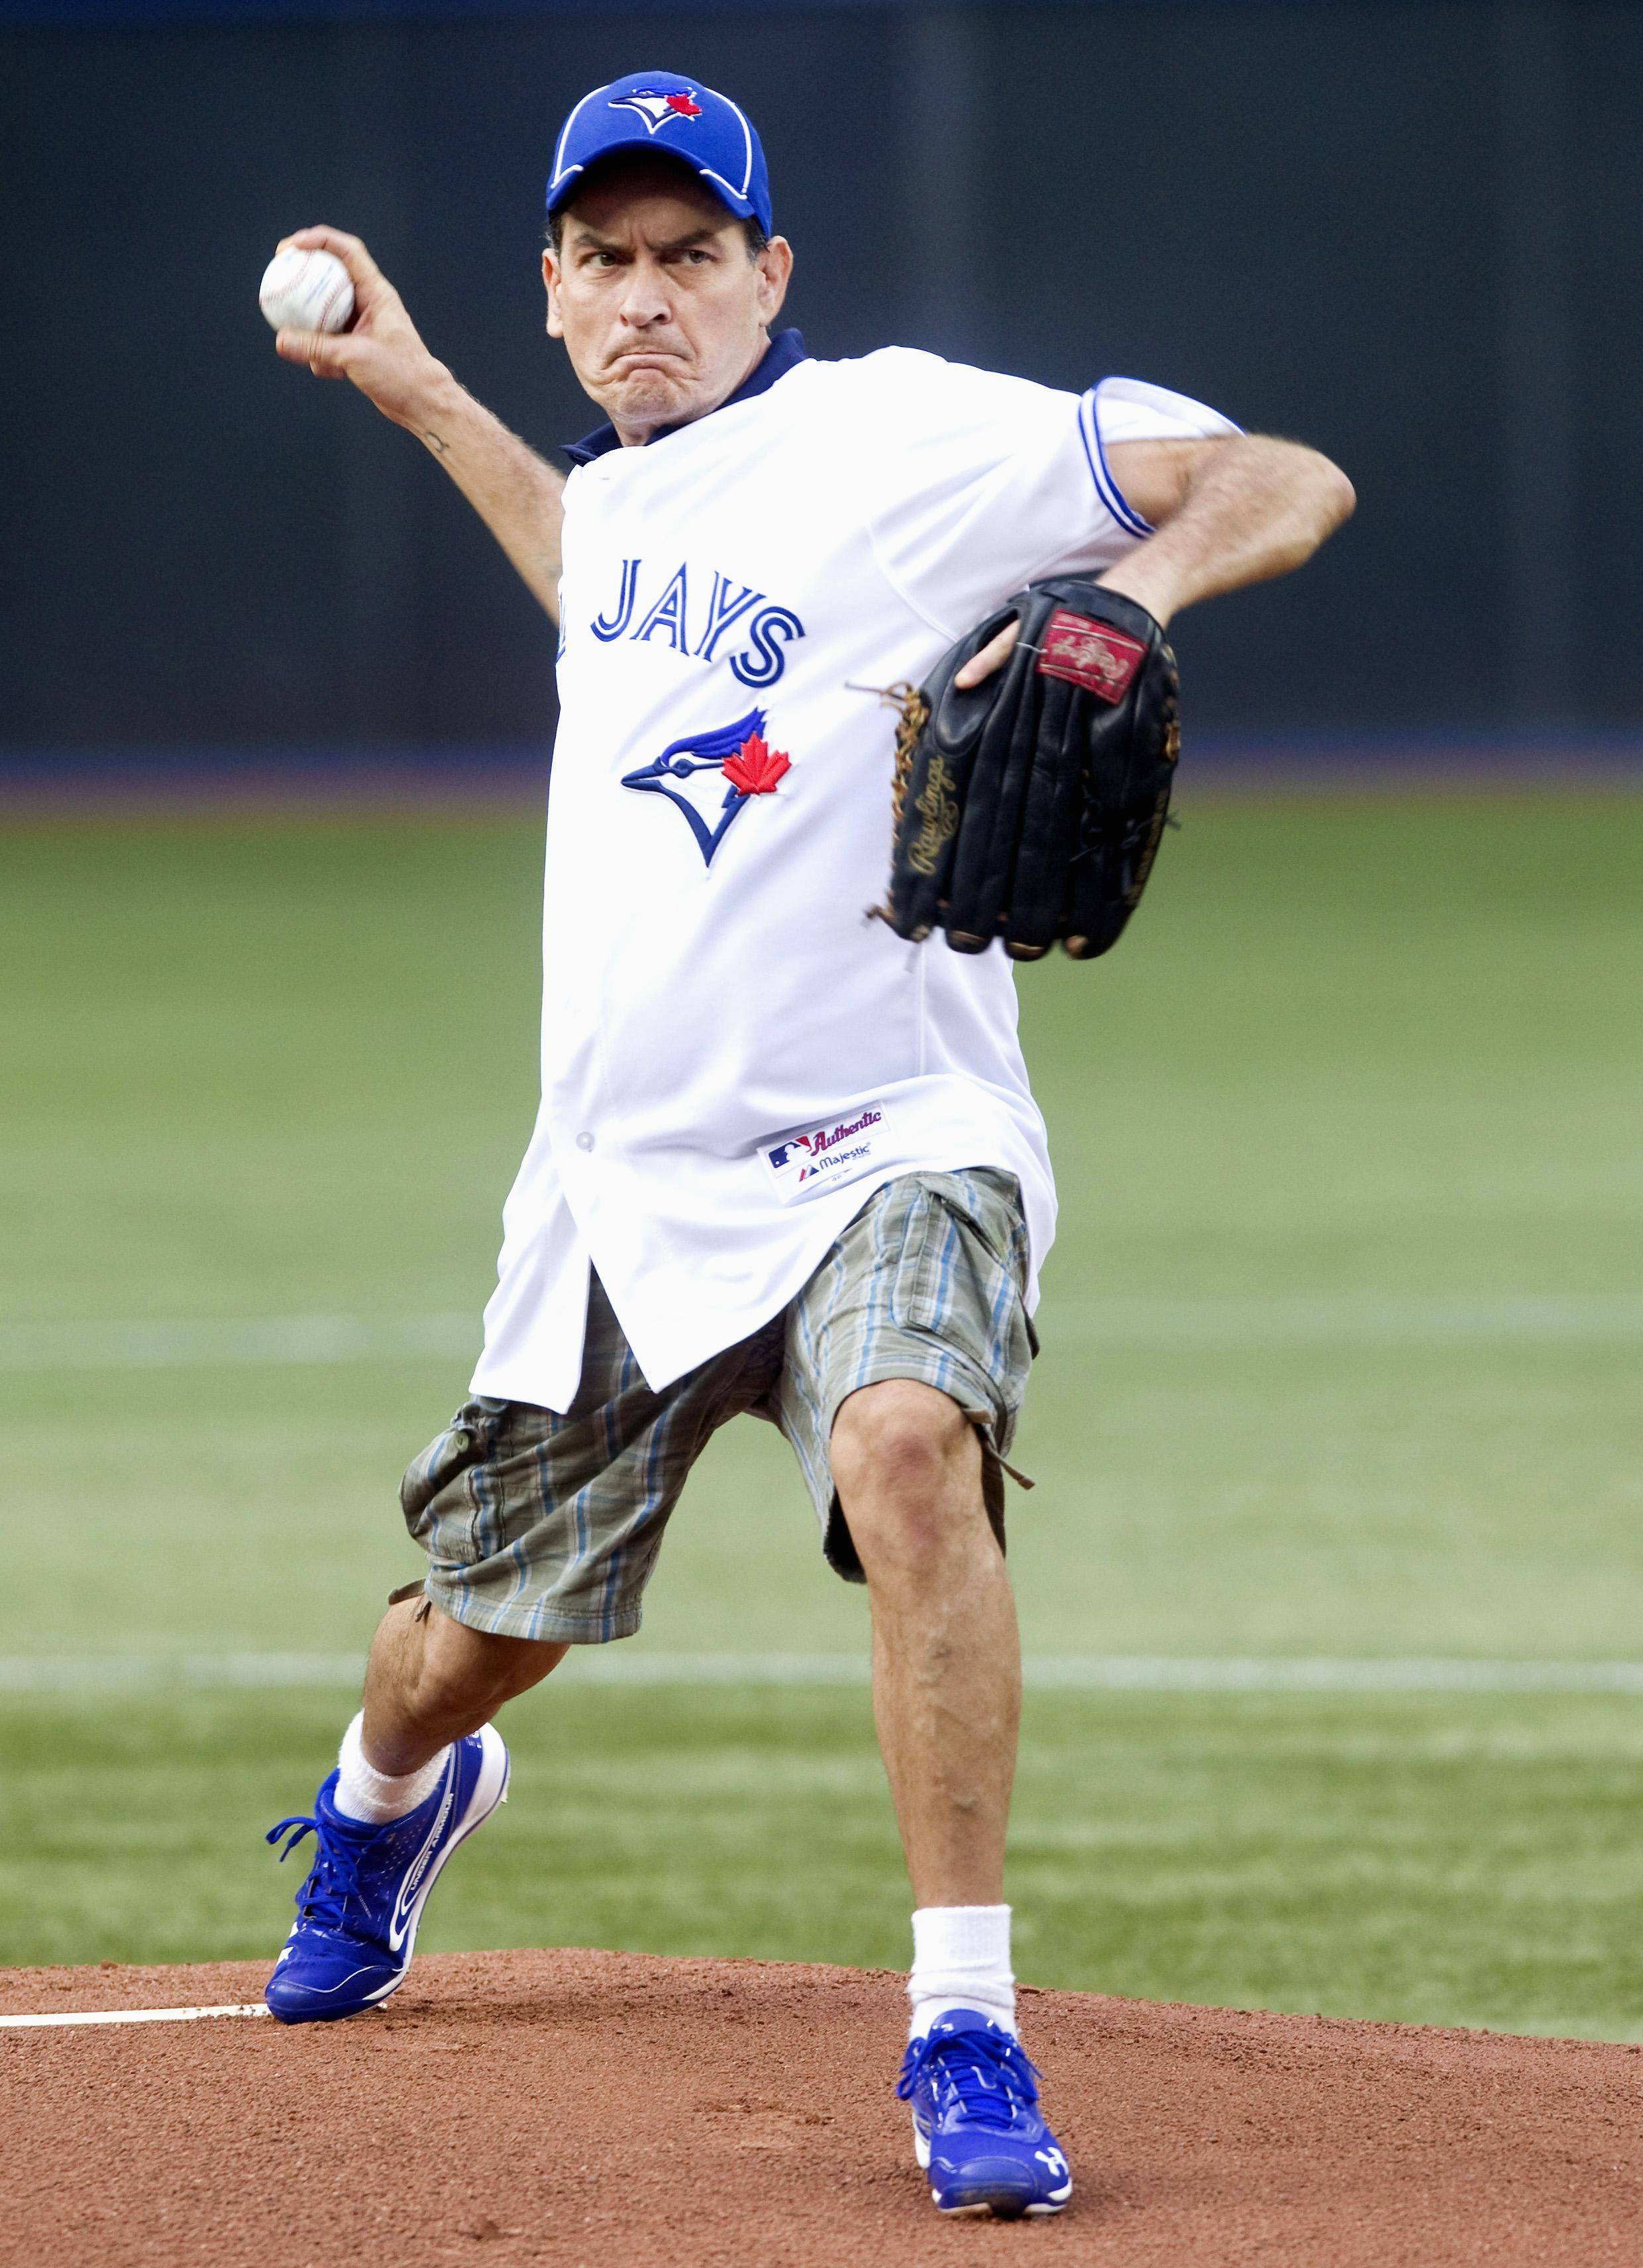 Charlie Sheen, aka 'Wild Thing', offers first pitch at World